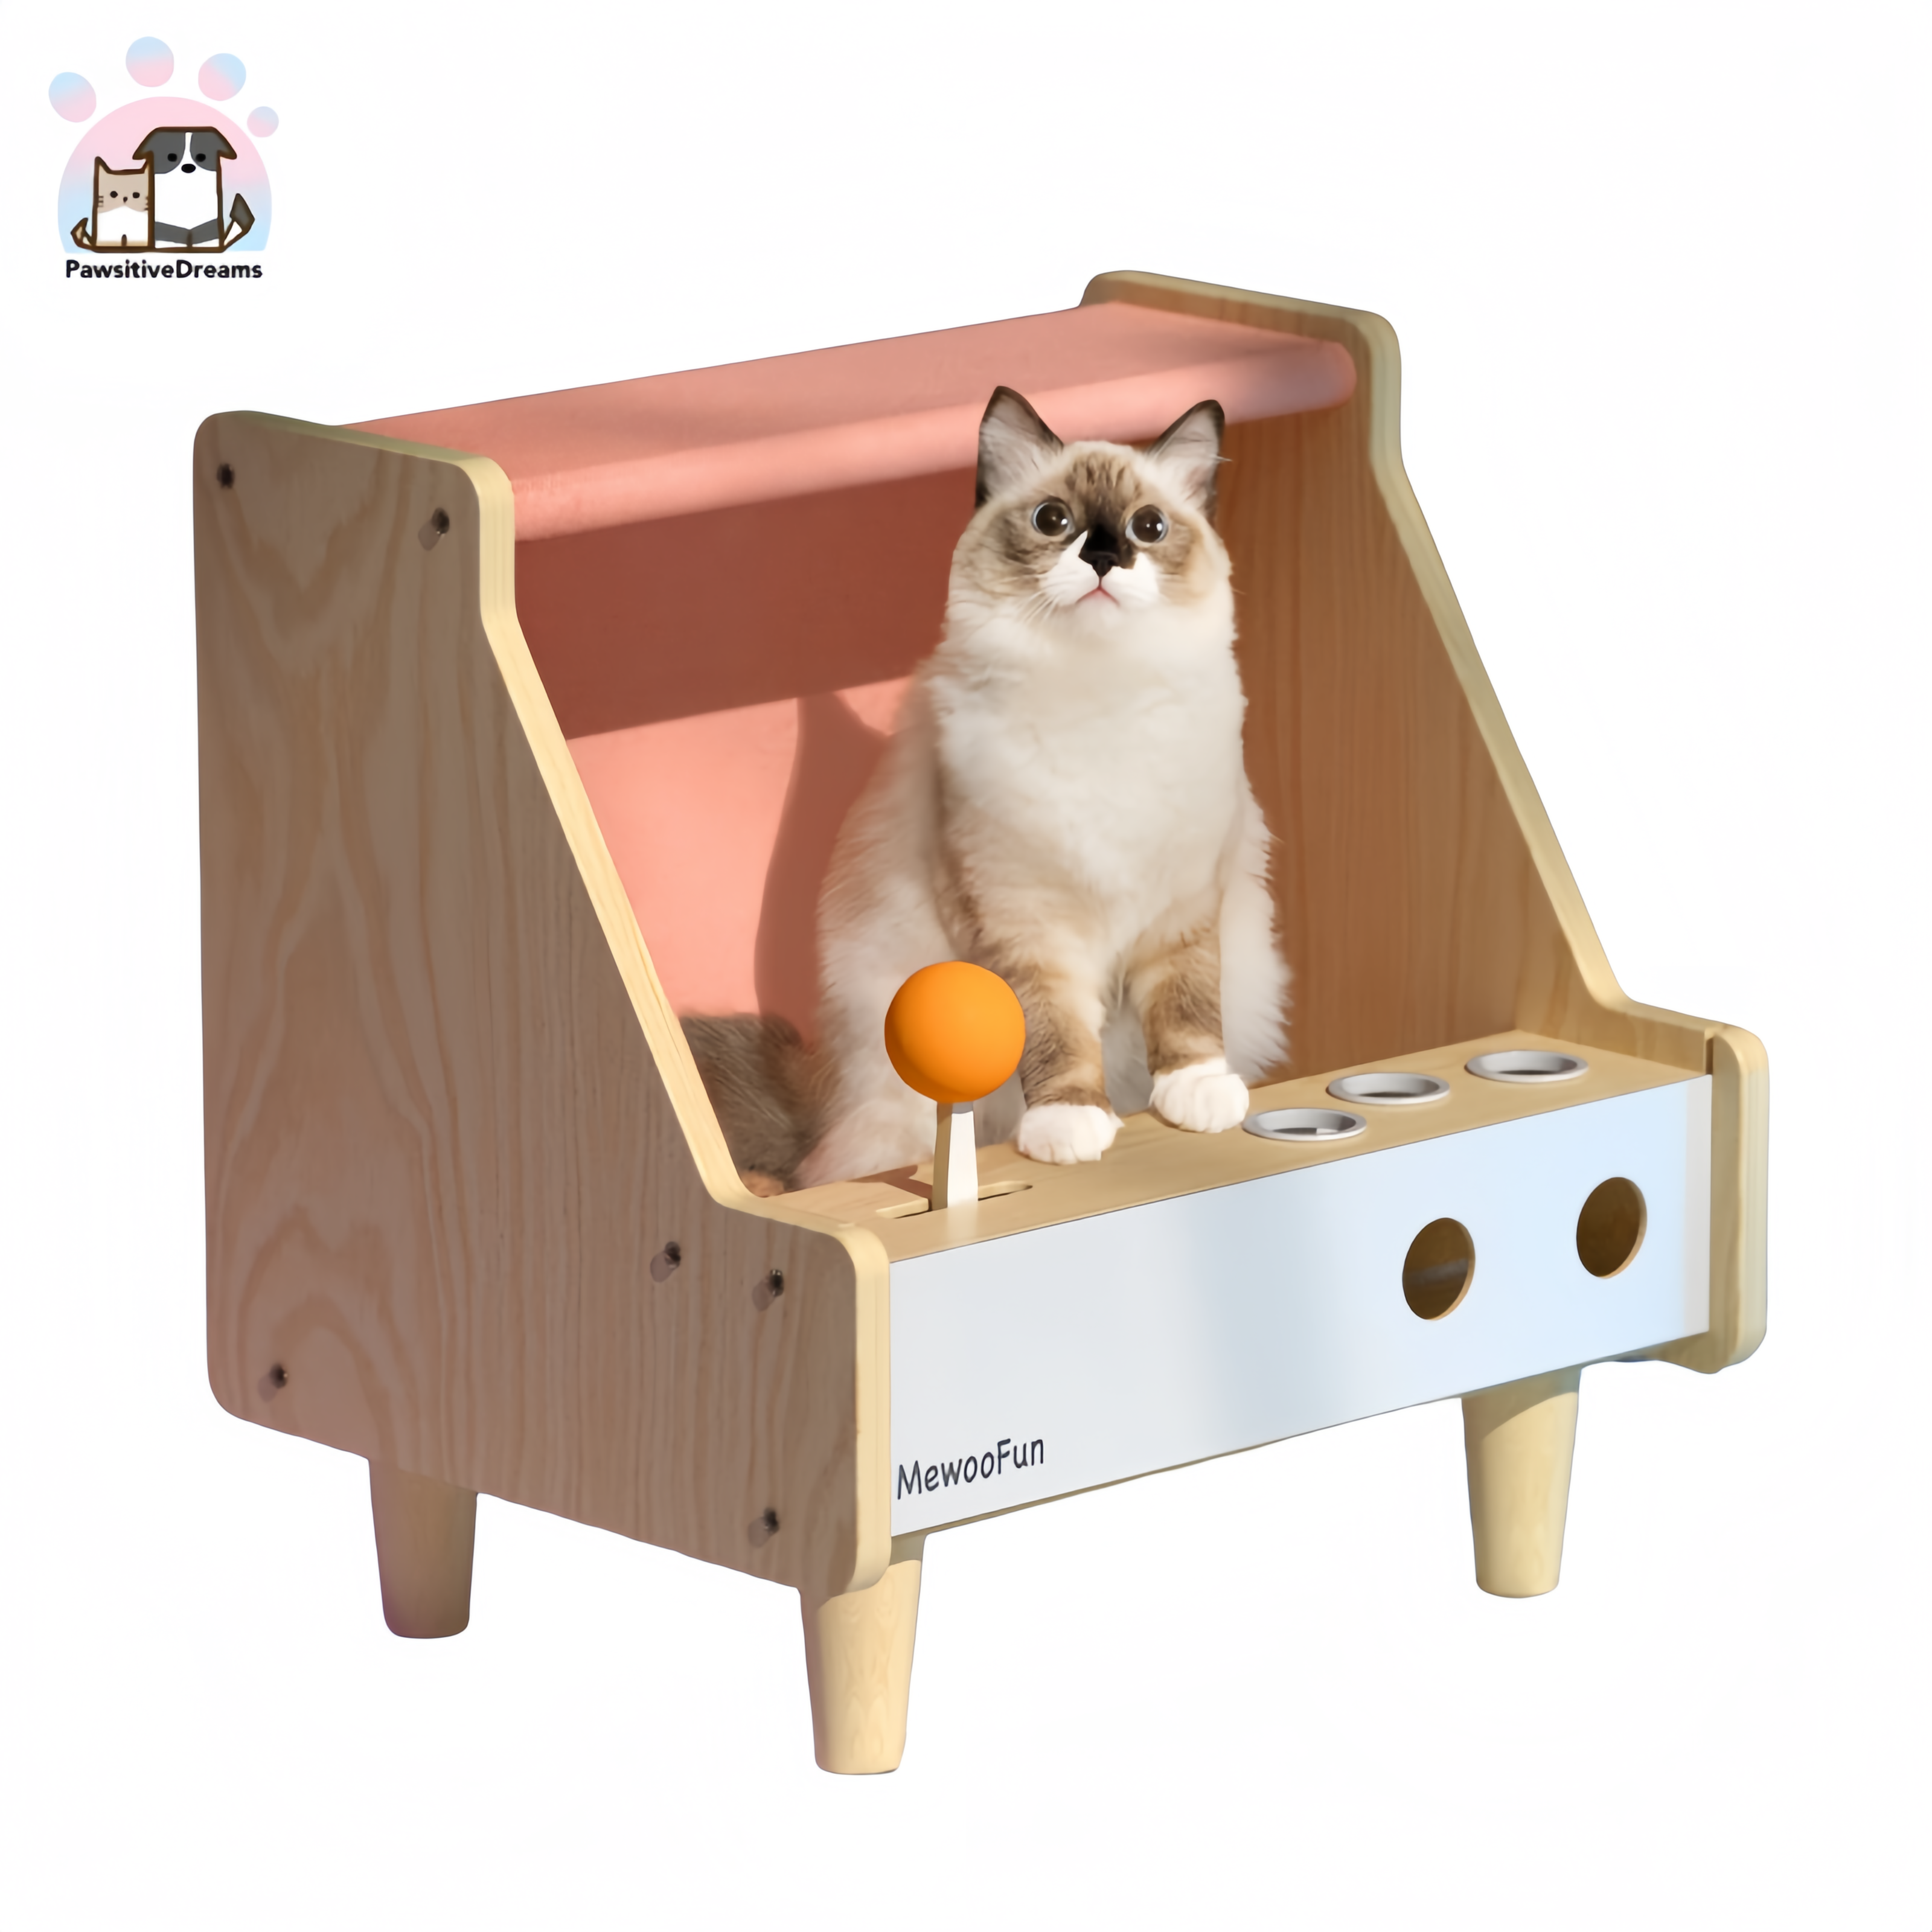 MewooFun Game Machine Cat Scratching Post With Bed For Cat - Pawsitive Dreams